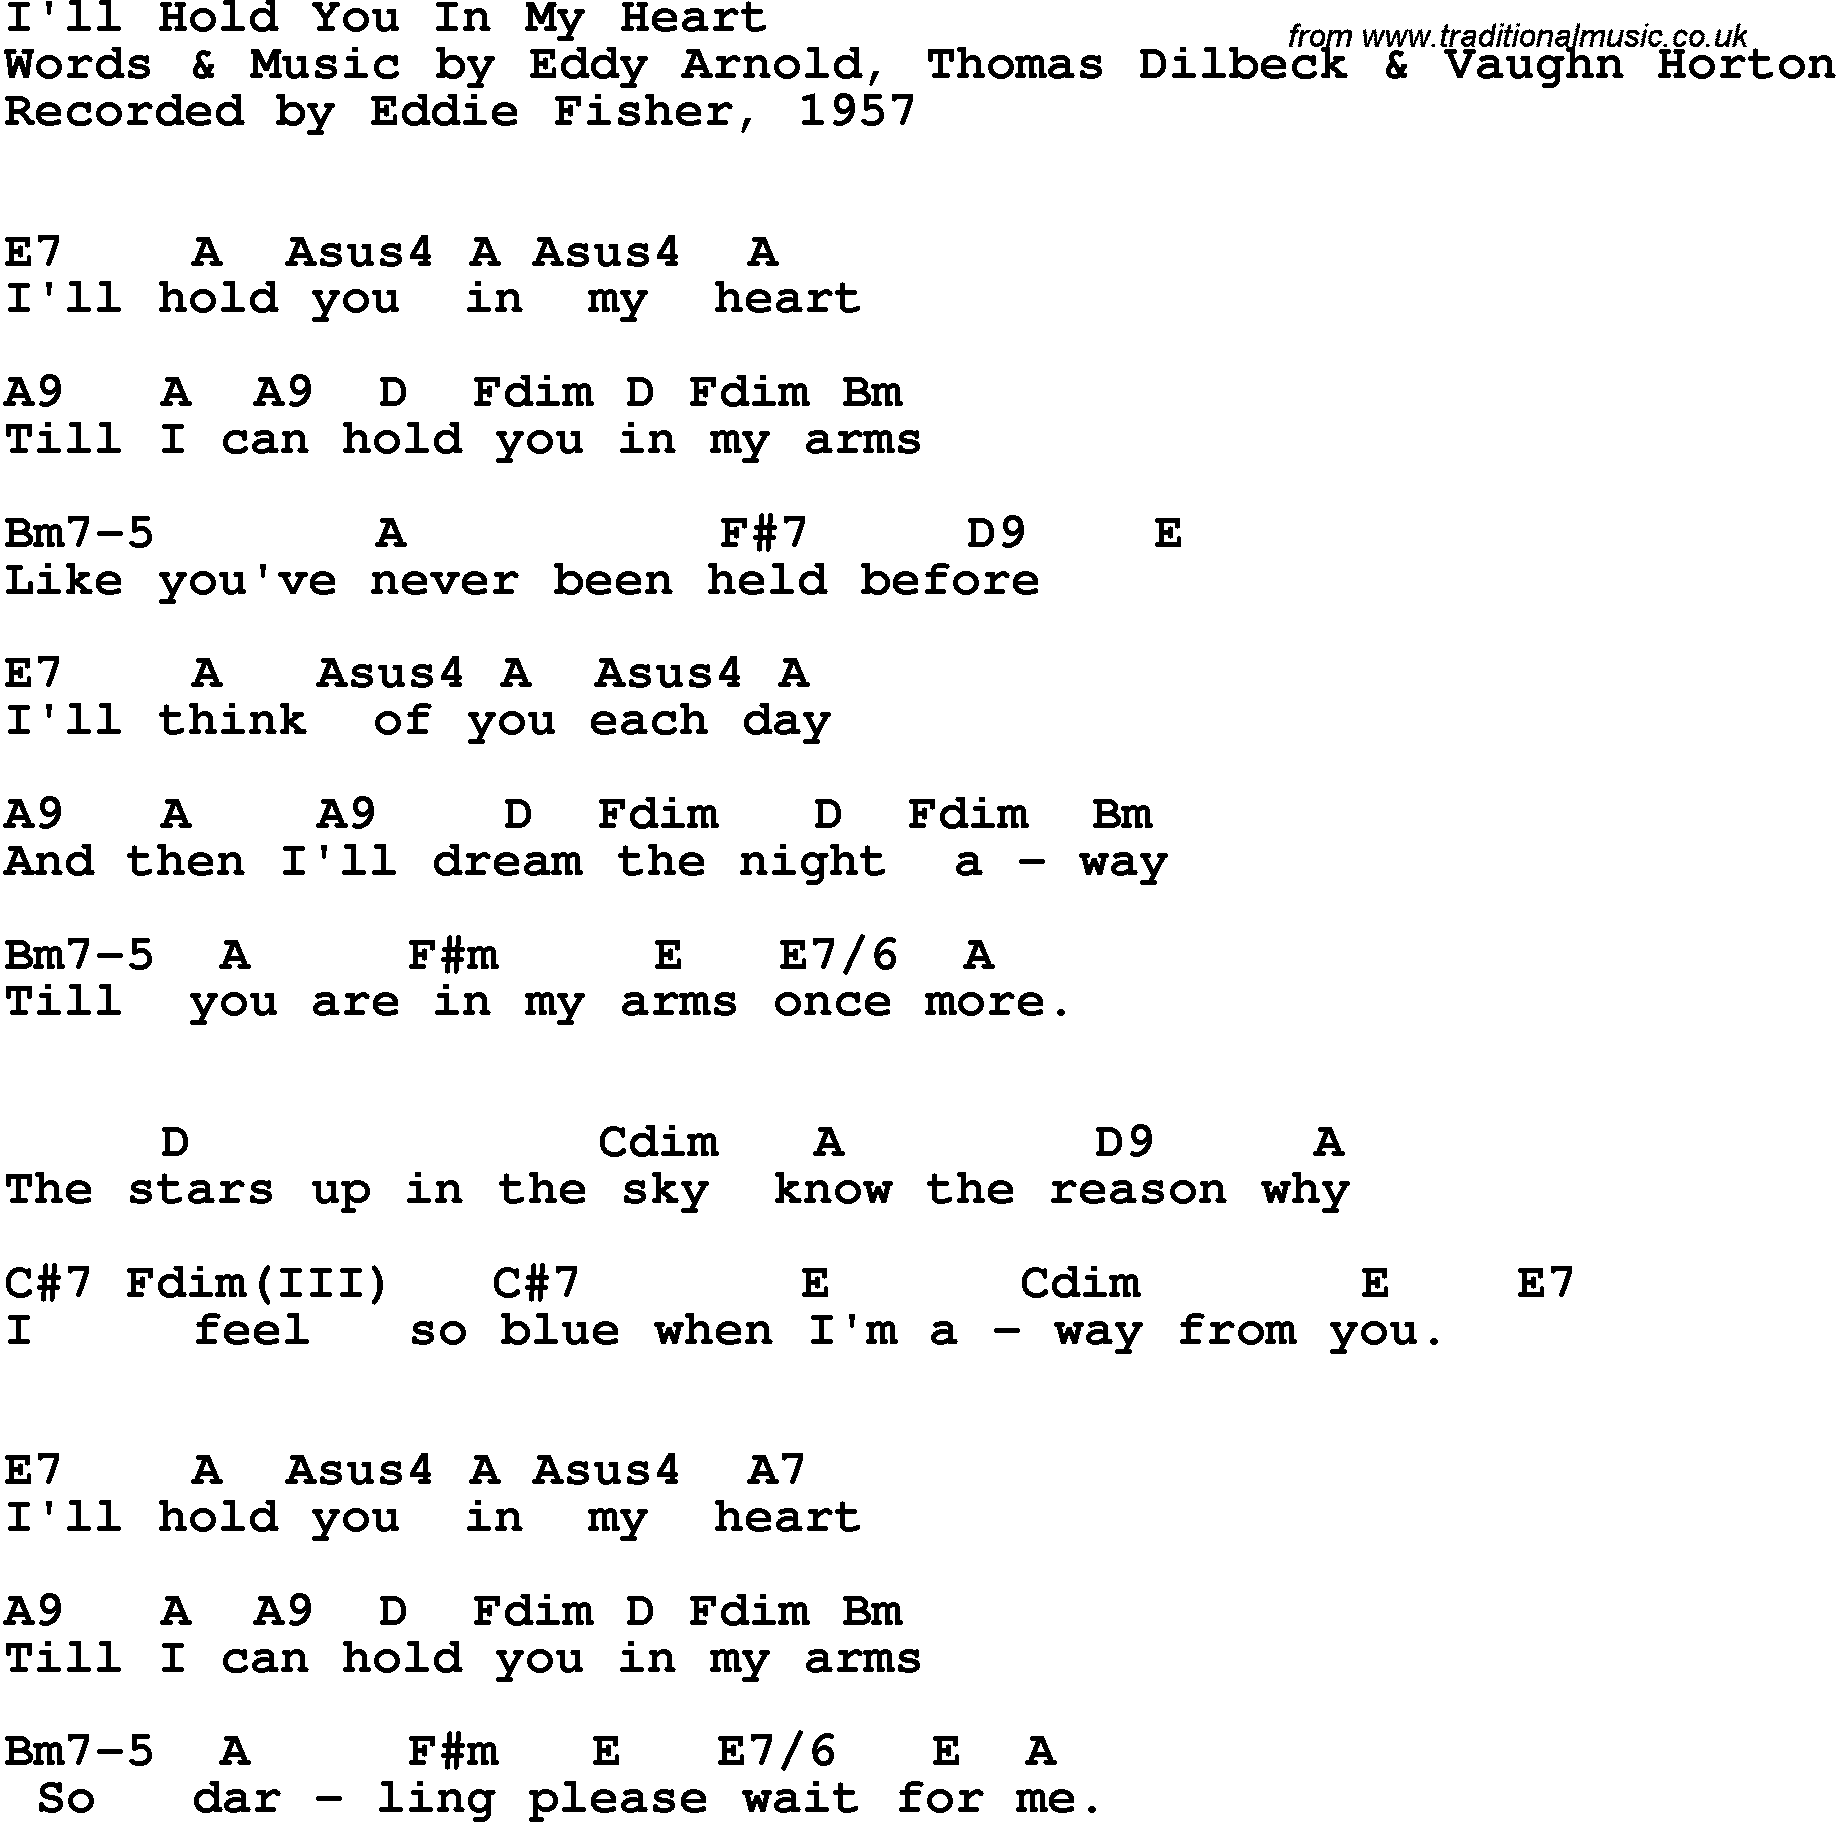 Song Lyrics with guitar chords for I'll Hold You In My Heart - Eddie Fisher, 1957